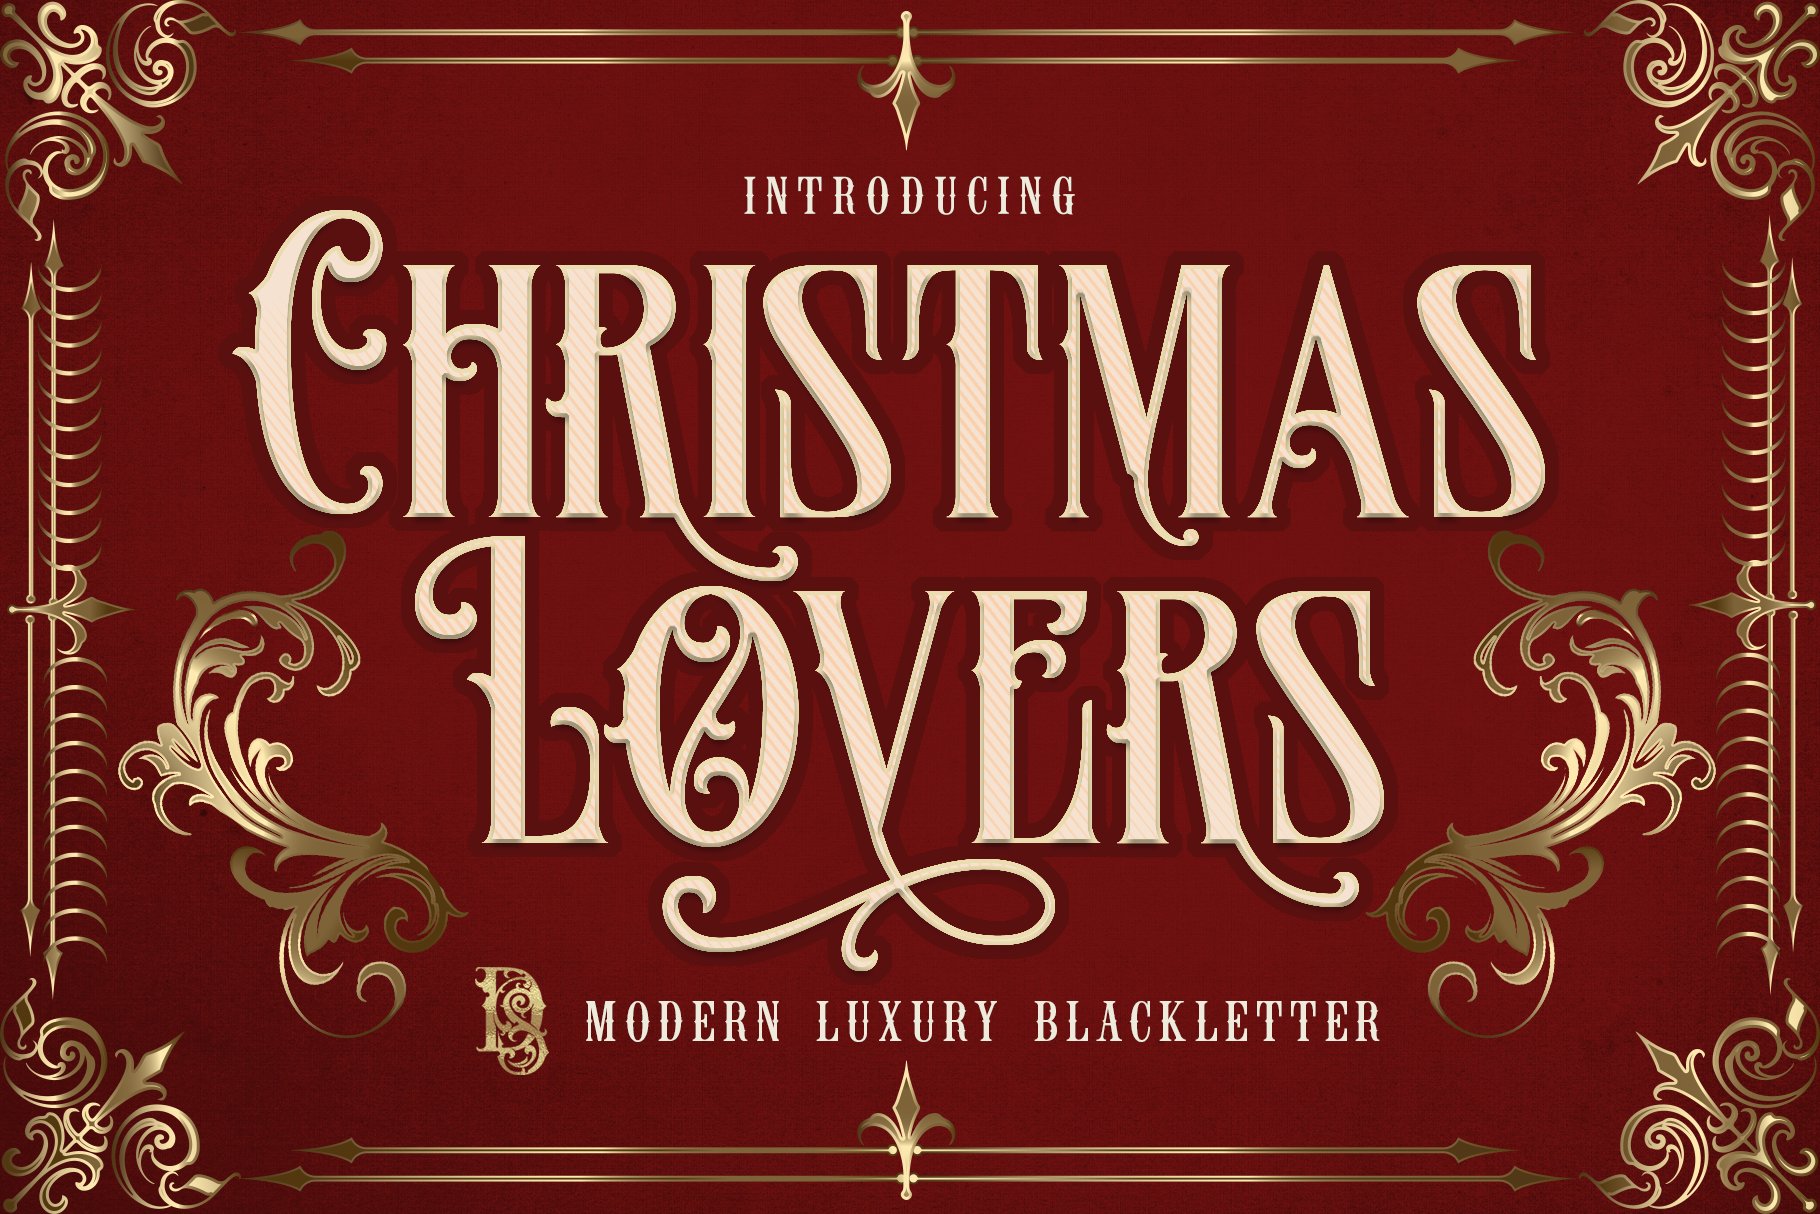 Christmas Lovers cover image.